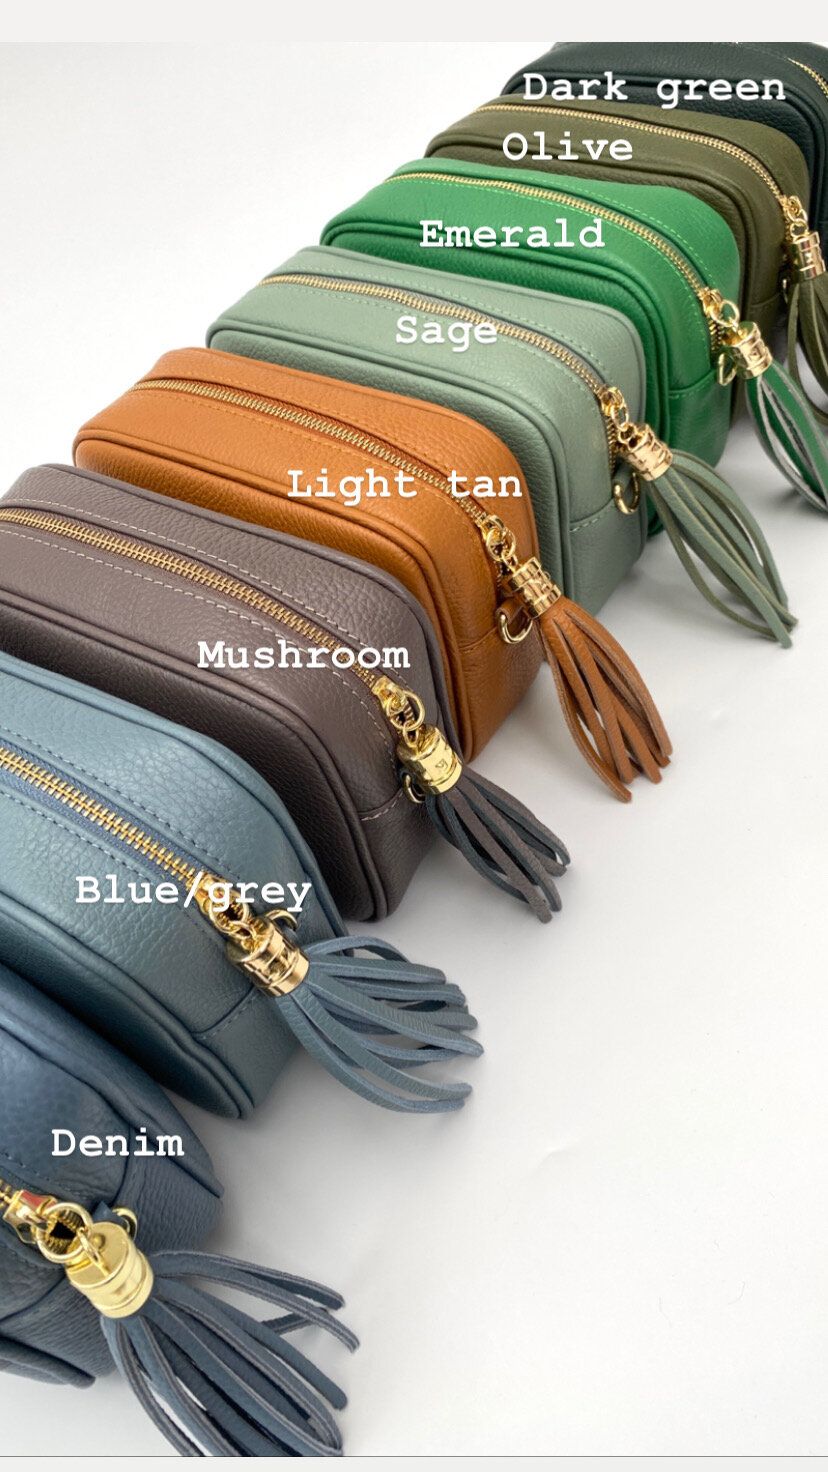 Stylish gifts, fashion & interior accessories, for you, for friends and for  your home - Italian Leather Box Bag with Tassel